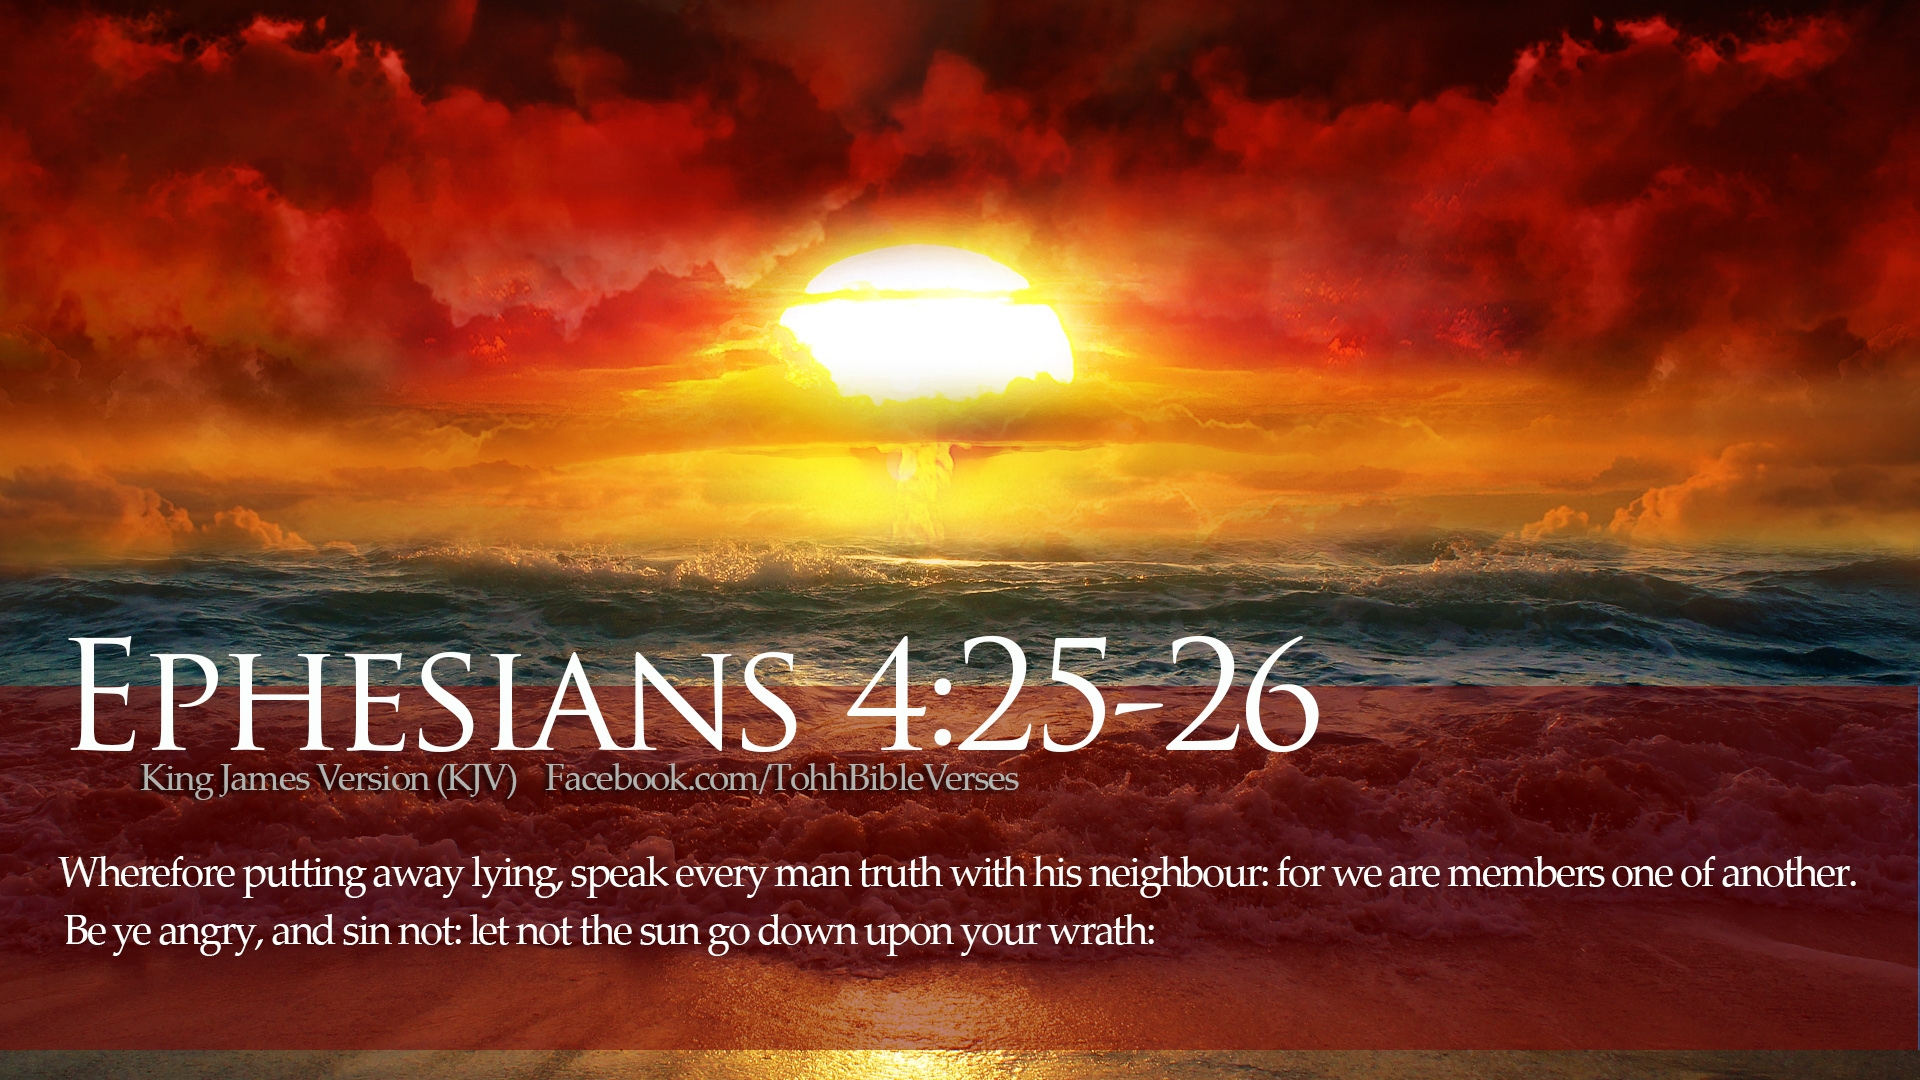 bible verses, Religion, Quote, Text, Poster, Bible, Verses Wallpaper